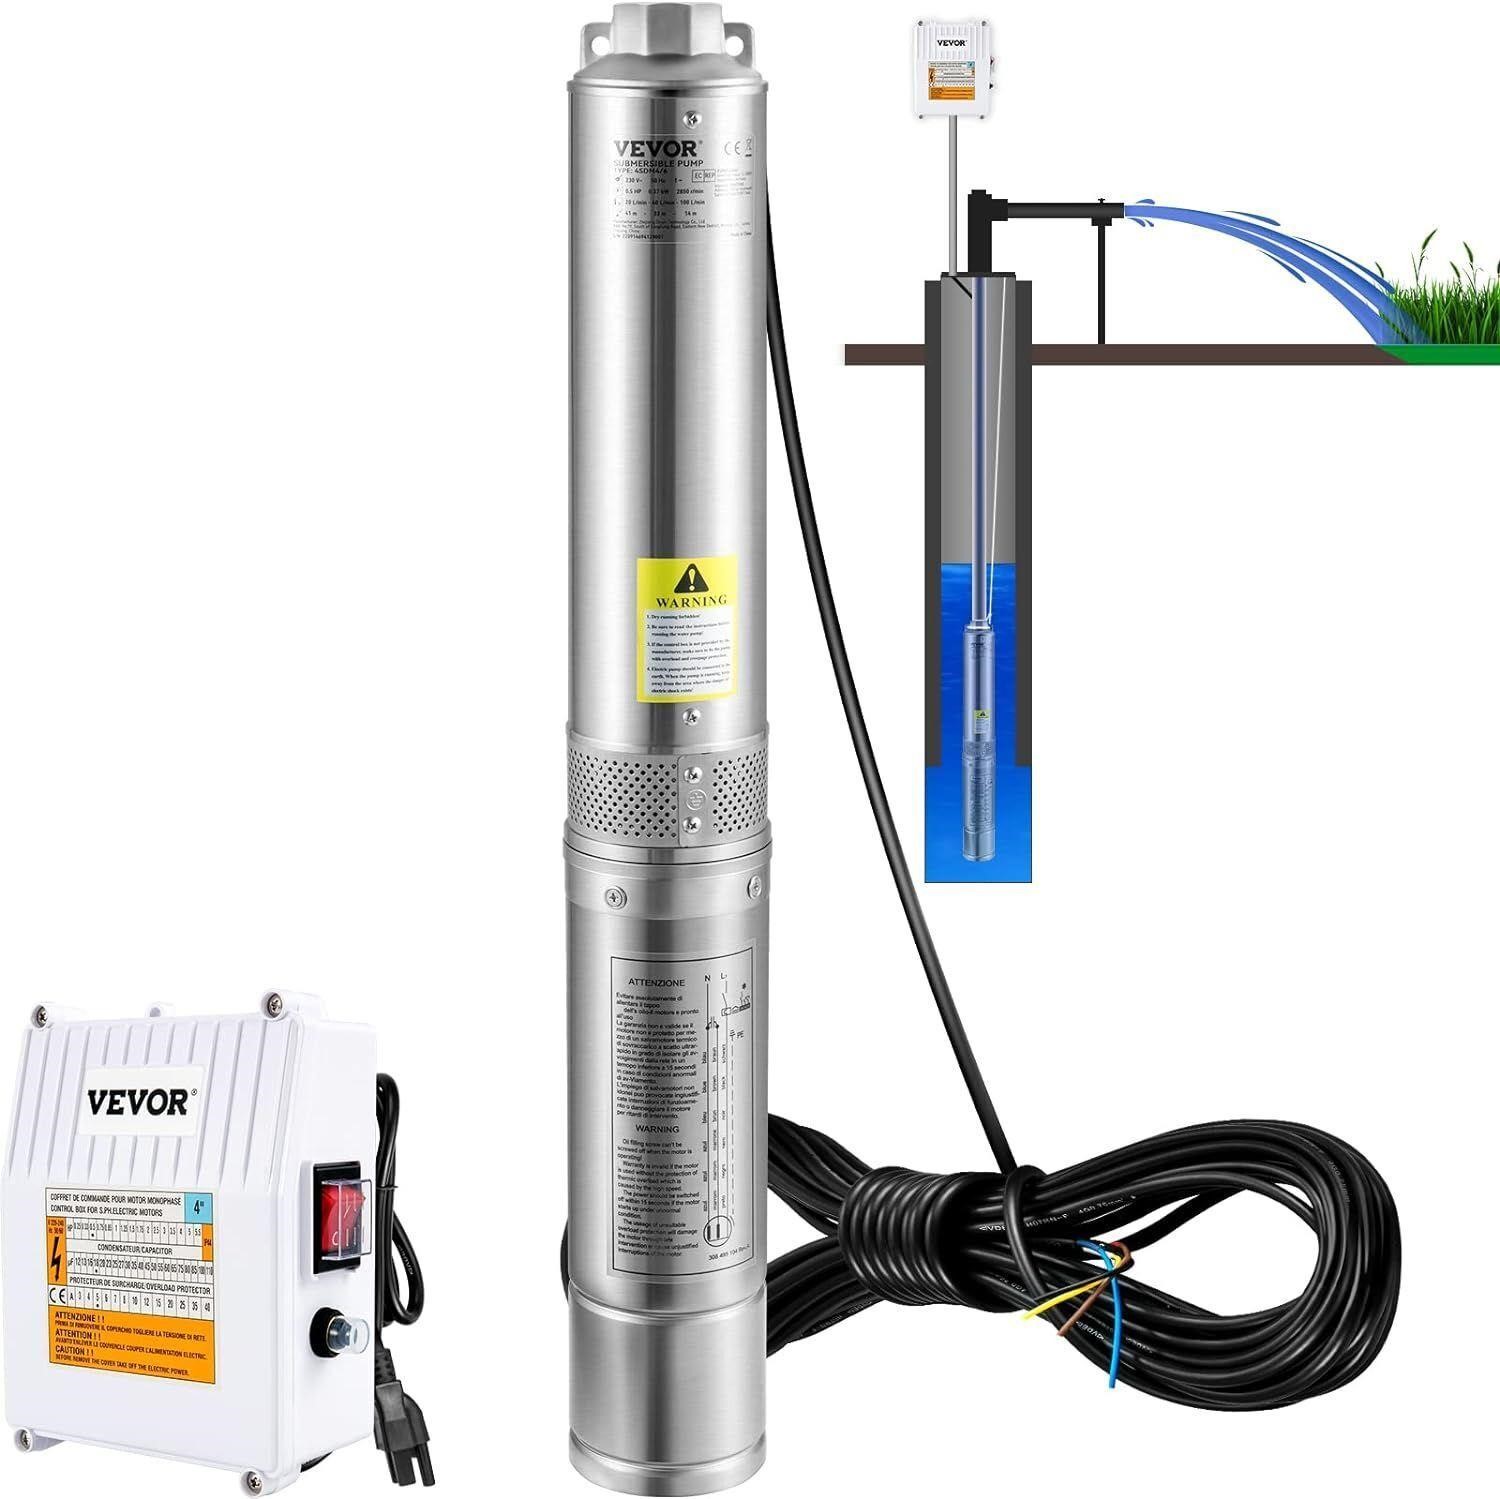 VEVOR Deep Well Submersible Pump with Control Box